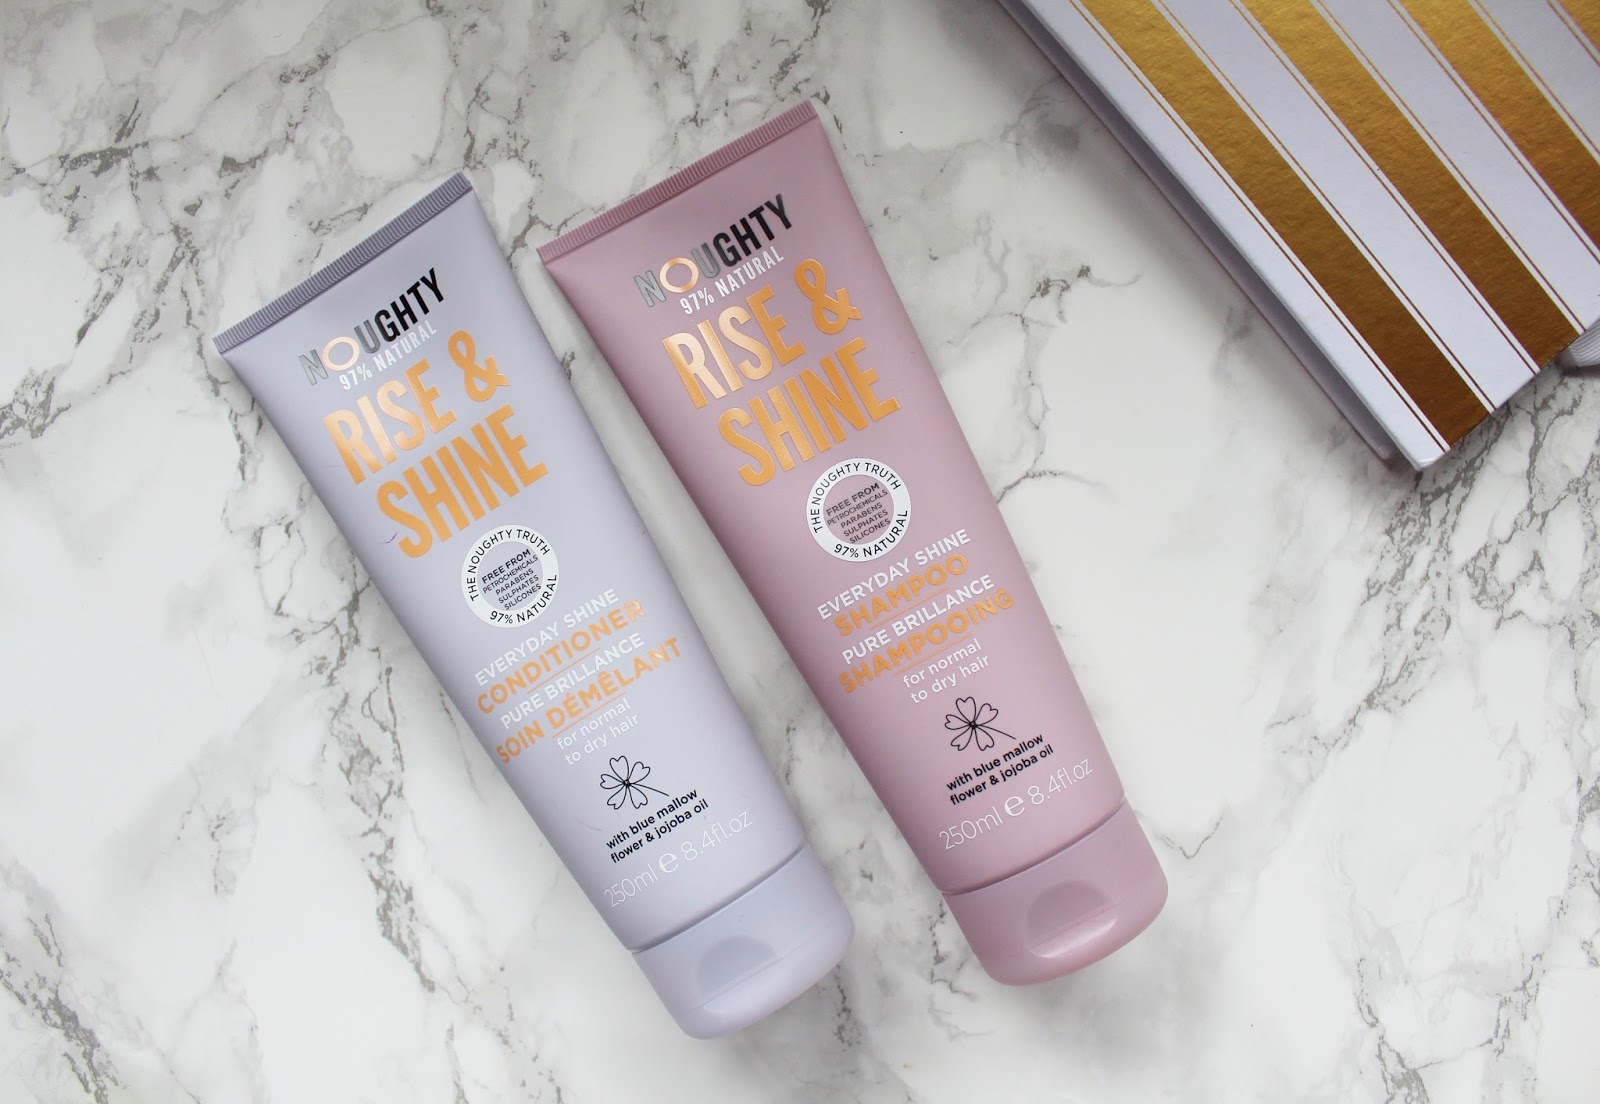 Noughty Rise & Shine Shampoo and Conditioner